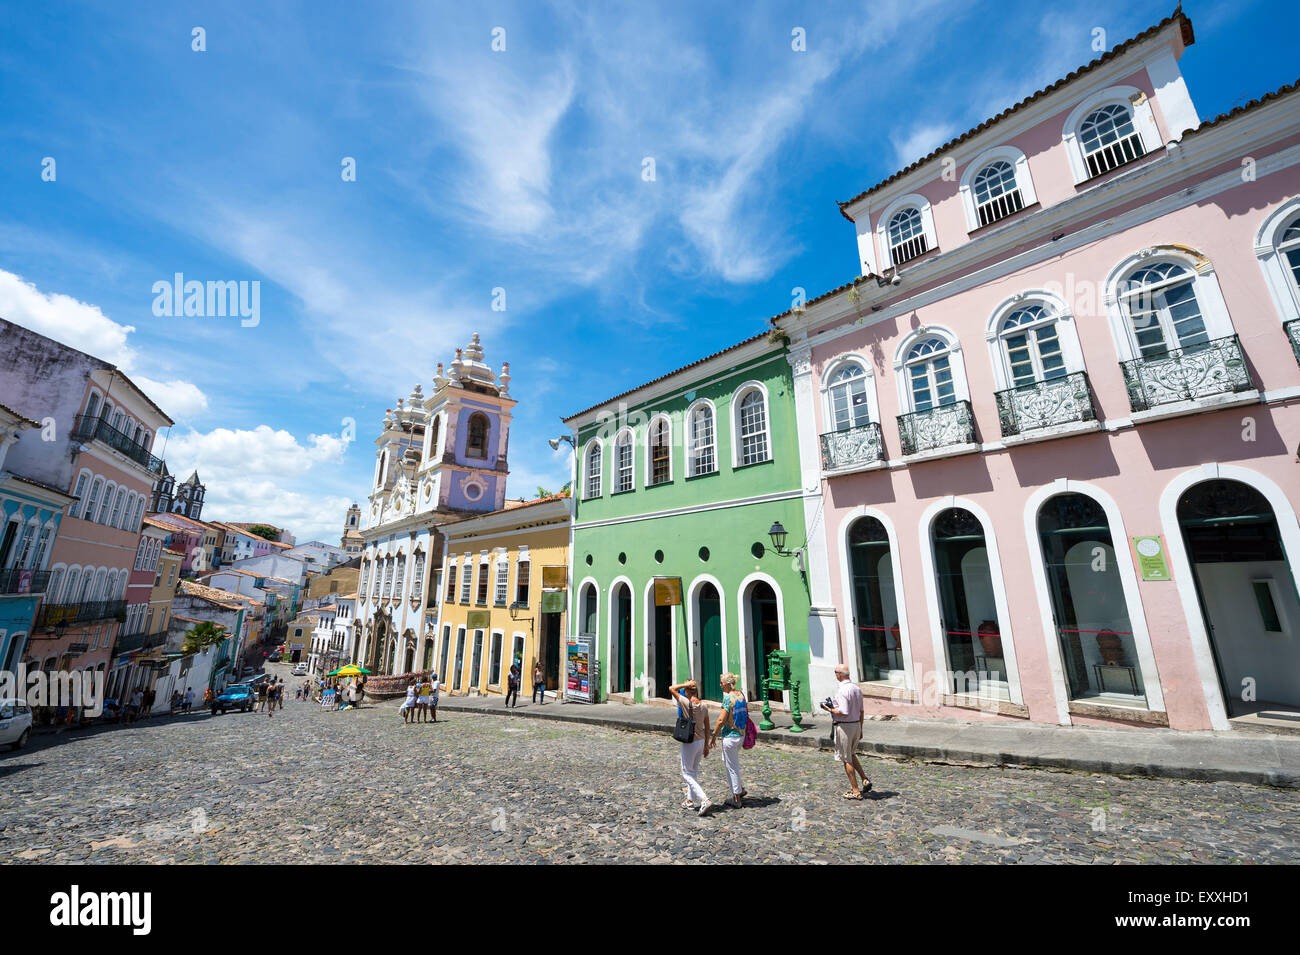 SALVADOR, BRAZIL - MARCH 12, 2015: Pedestrians walk through a plaza surrounded by colonial buildings in the Pelourinho district. Stock Photo